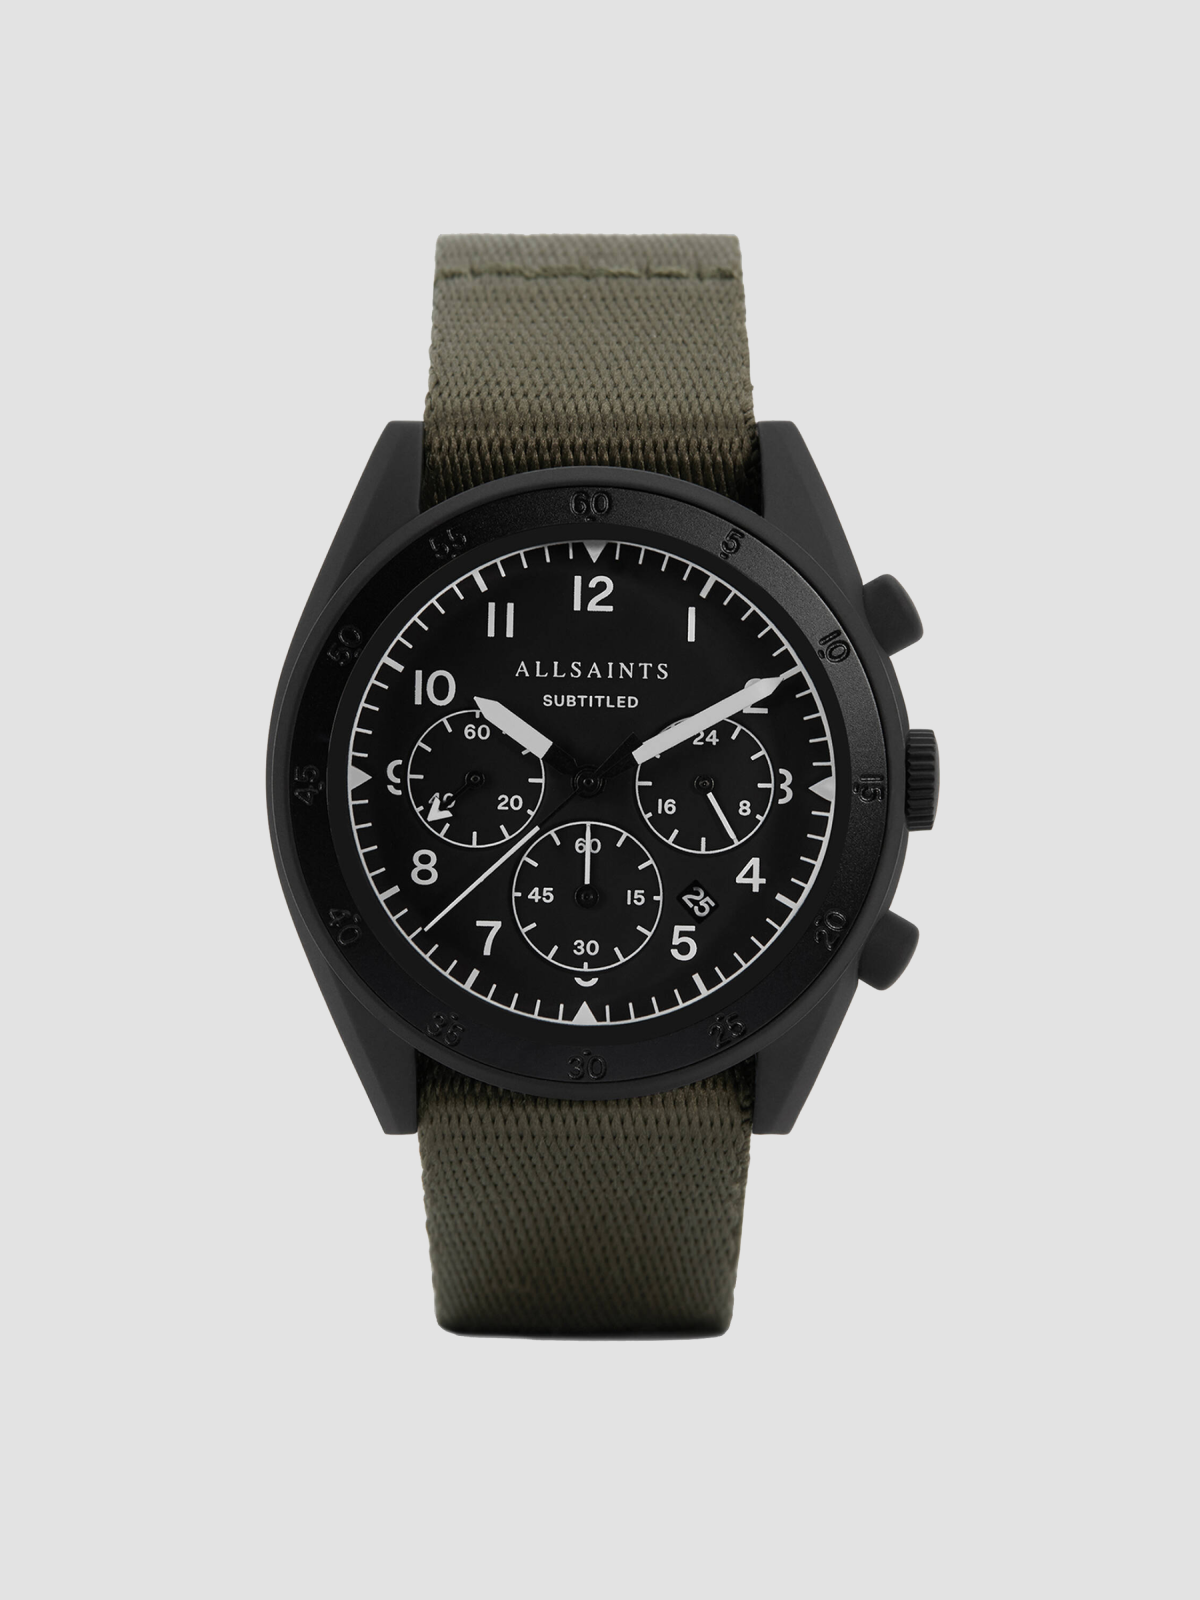 Subtitled I Stainless Steel Nylon Watch2